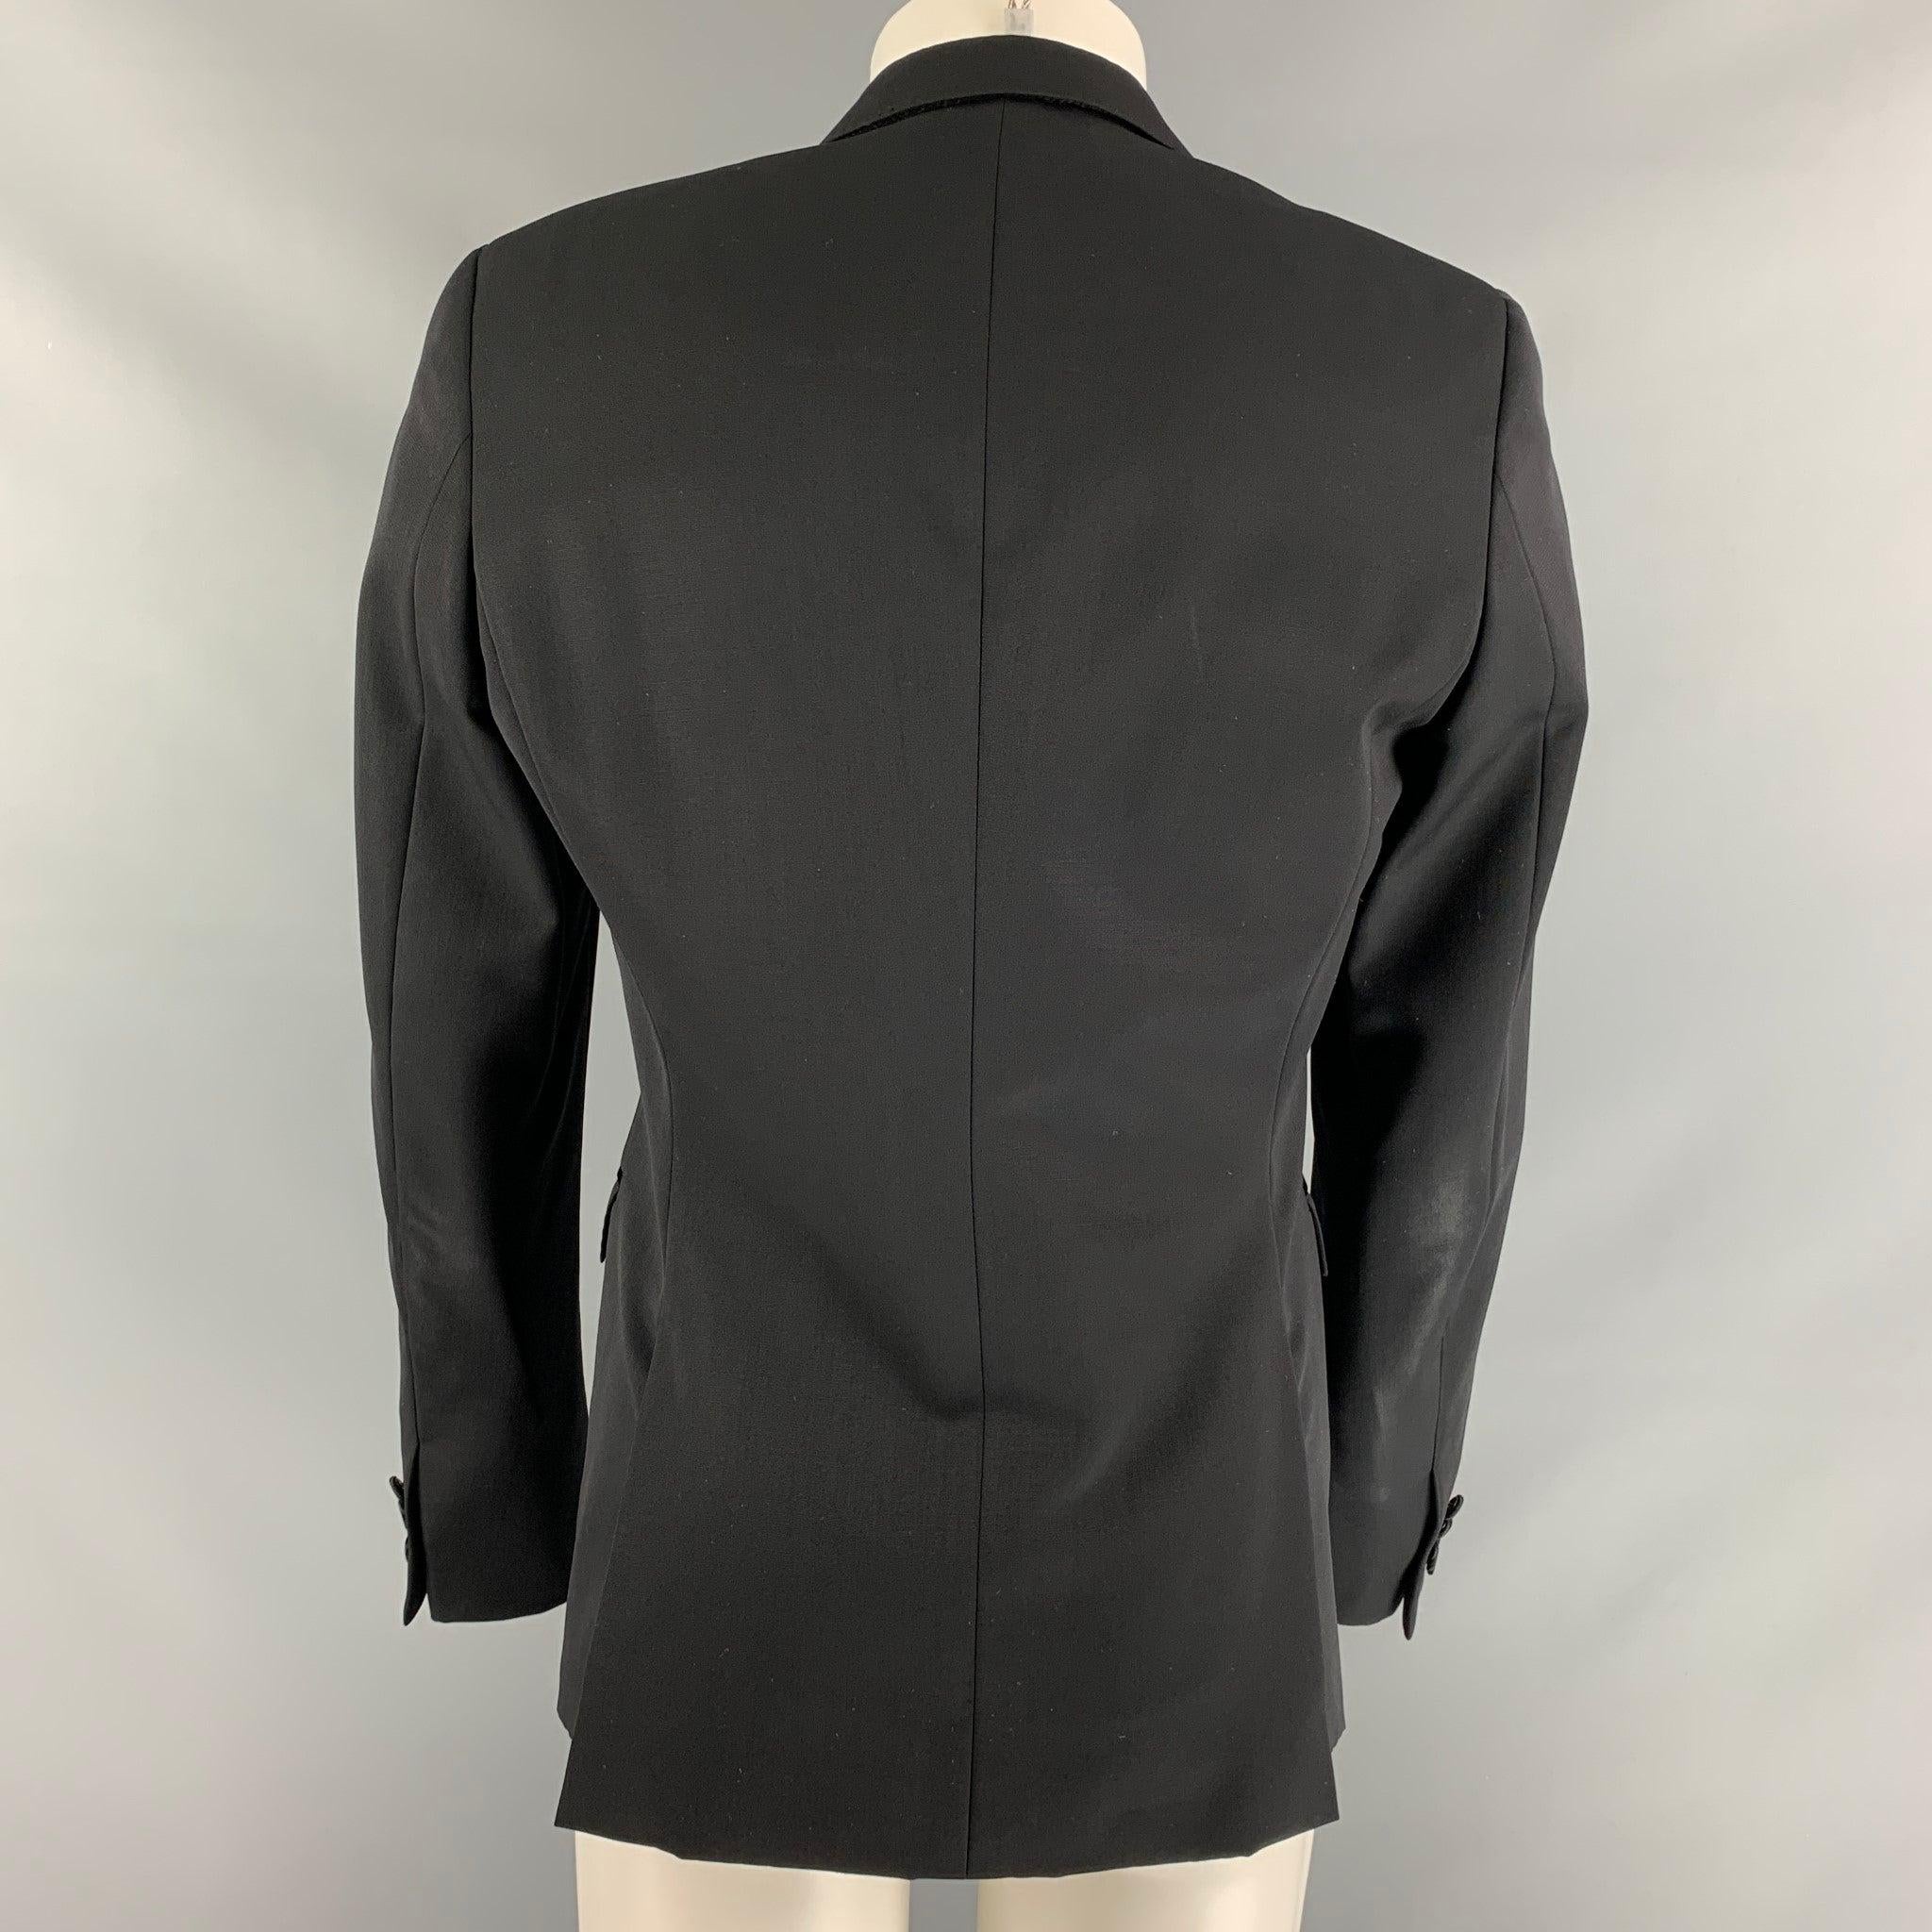 BURBERRY PRORSUM Chest Size 38 Black Virgin Wool Tuxedo Sport Coat In Excellent Condition For Sale In San Francisco, CA